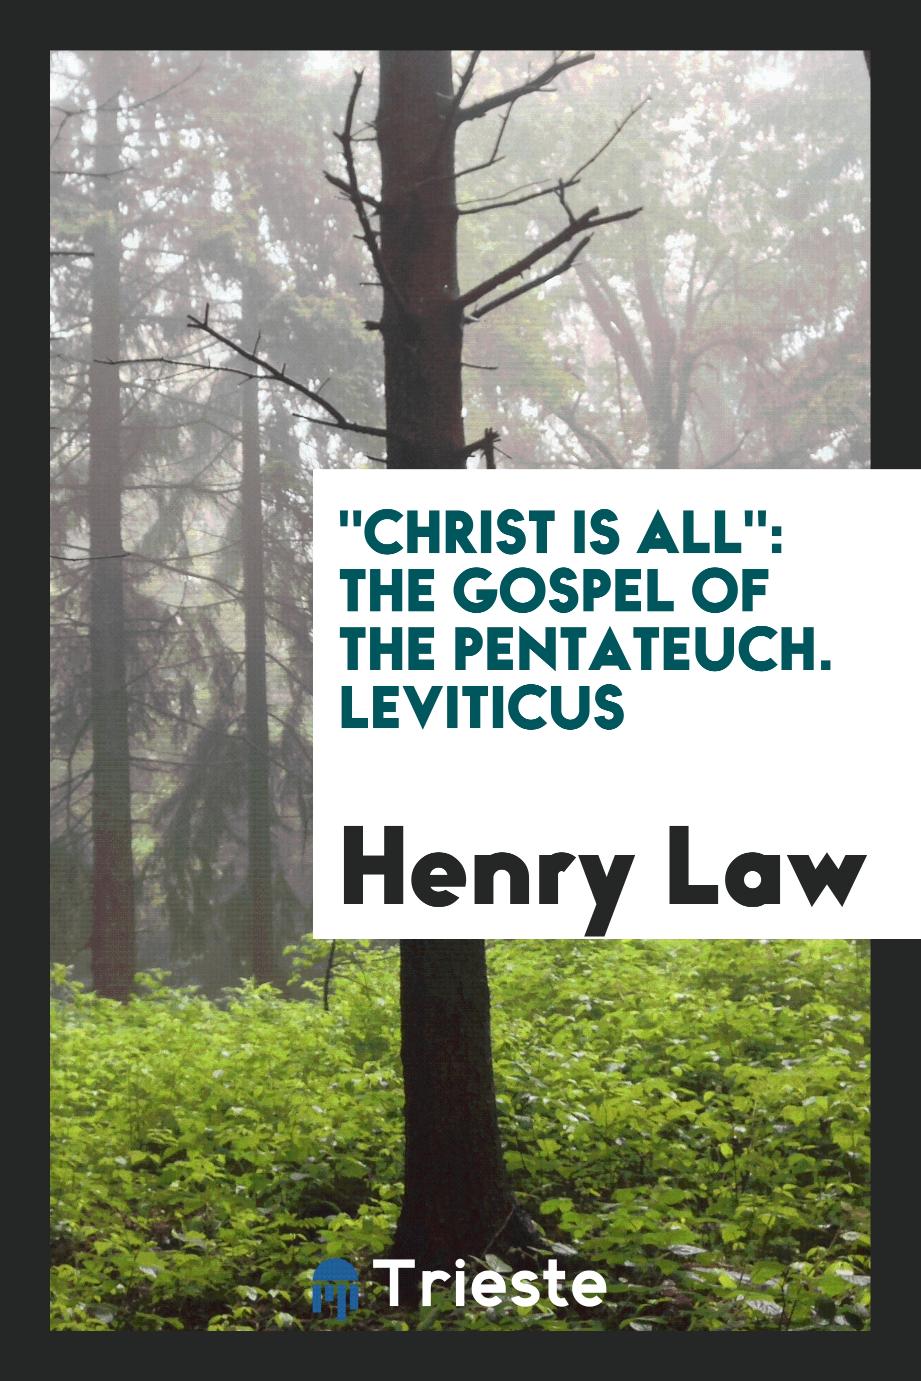 "Christ is All": The Gospel of the Pentateuch. Leviticus